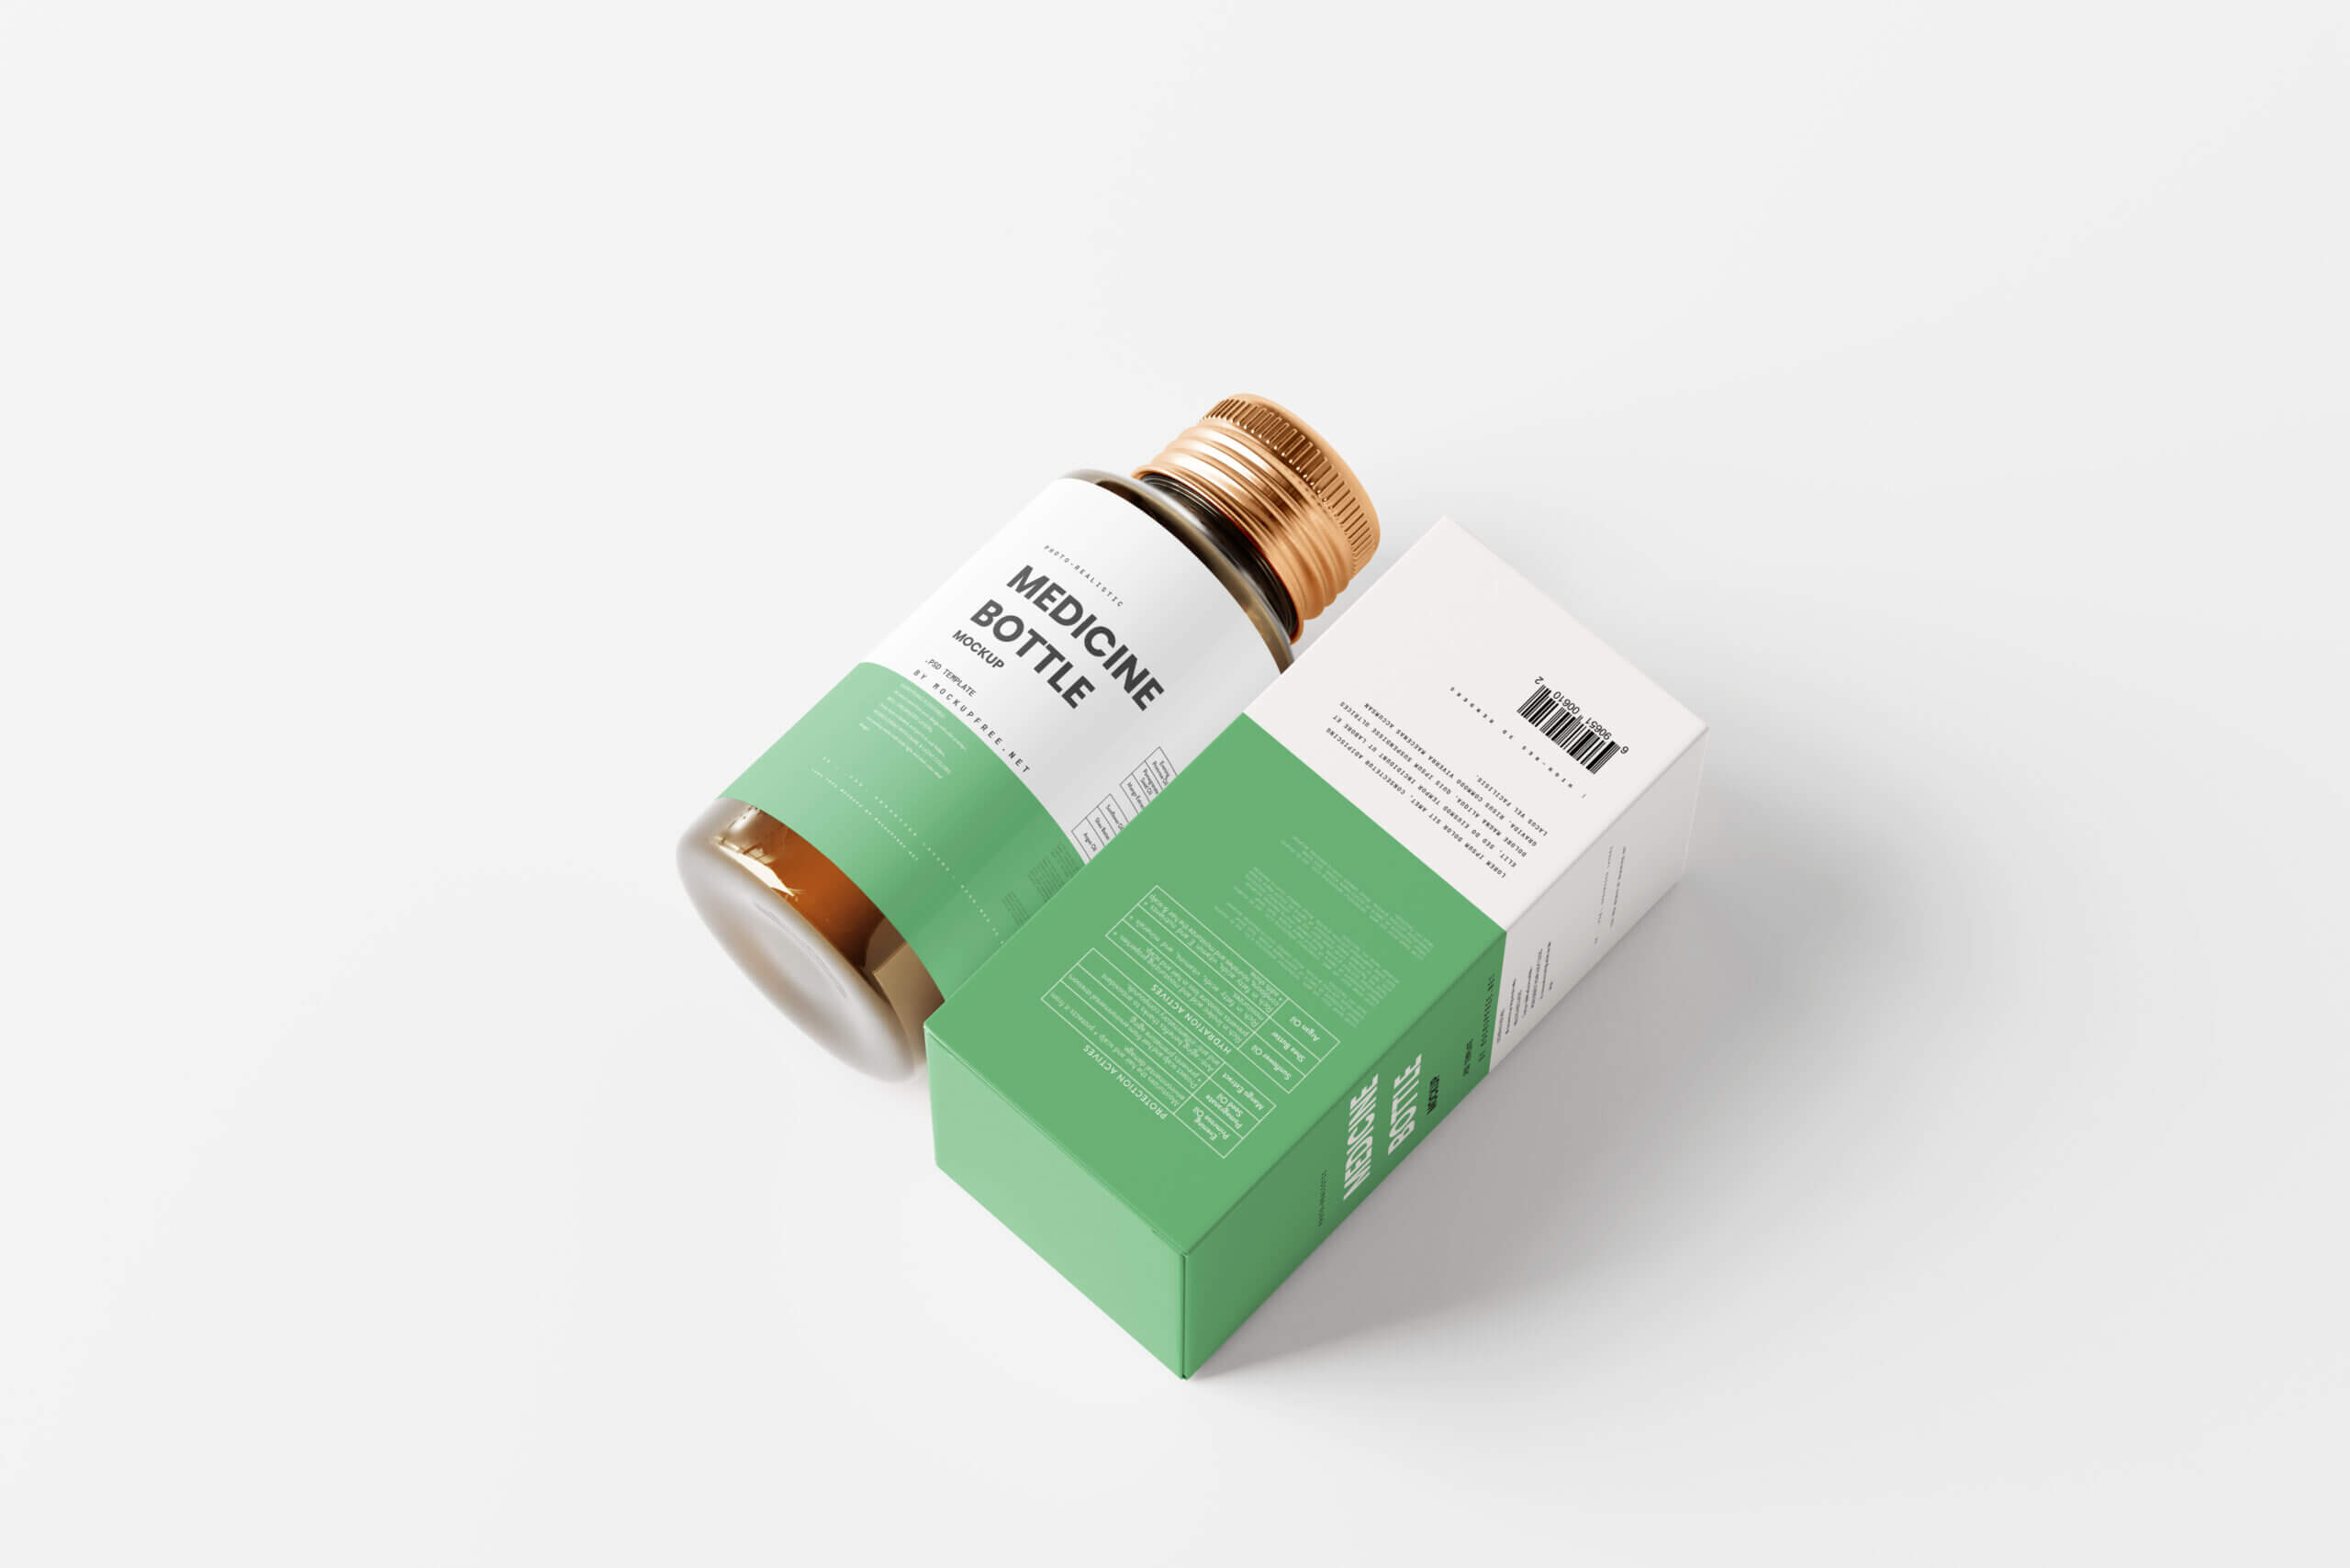 10 Free Amber Medicine Bottle With Box Mockup PSD Files8